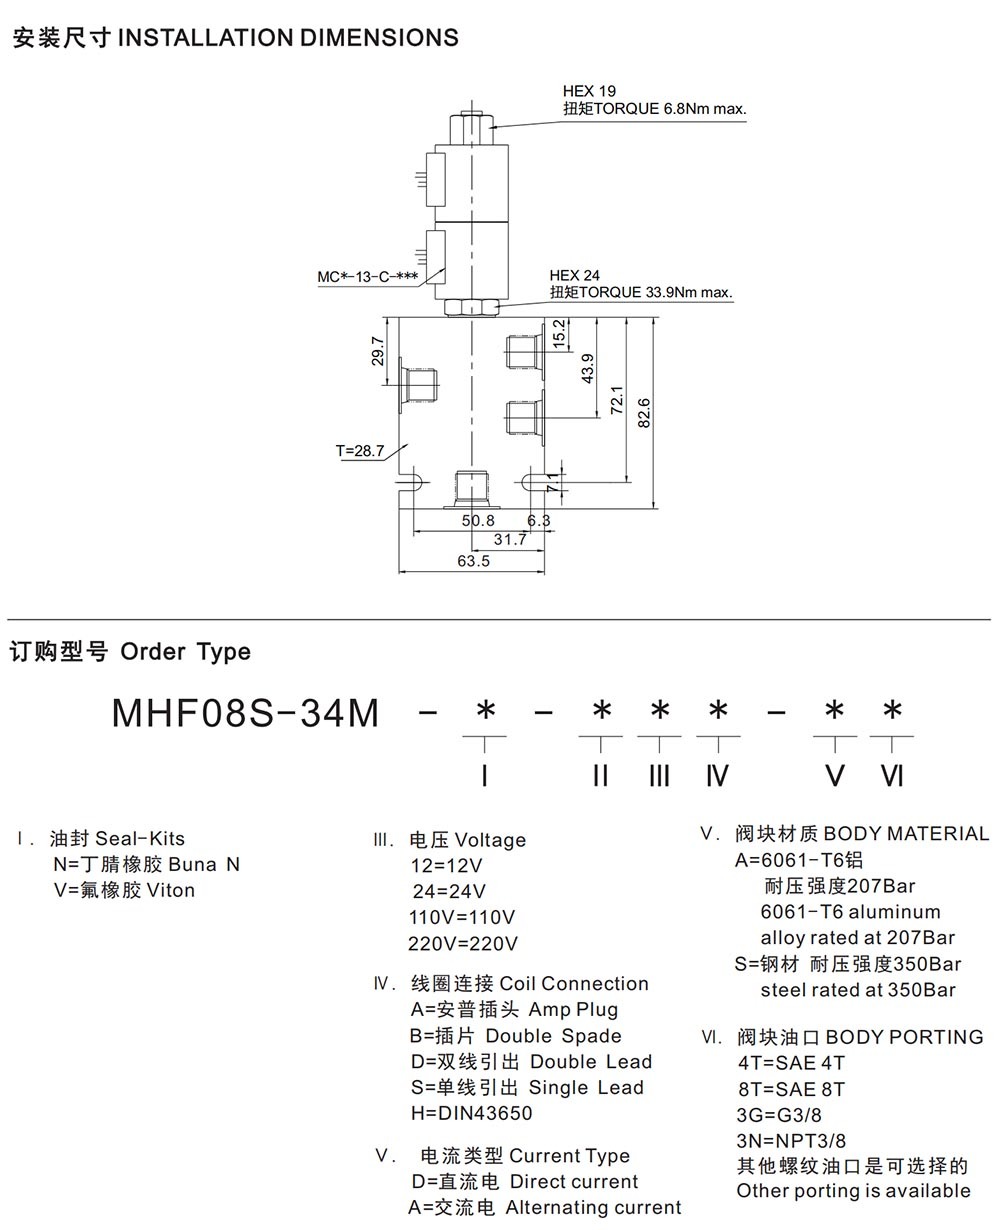 MHF08S-34M